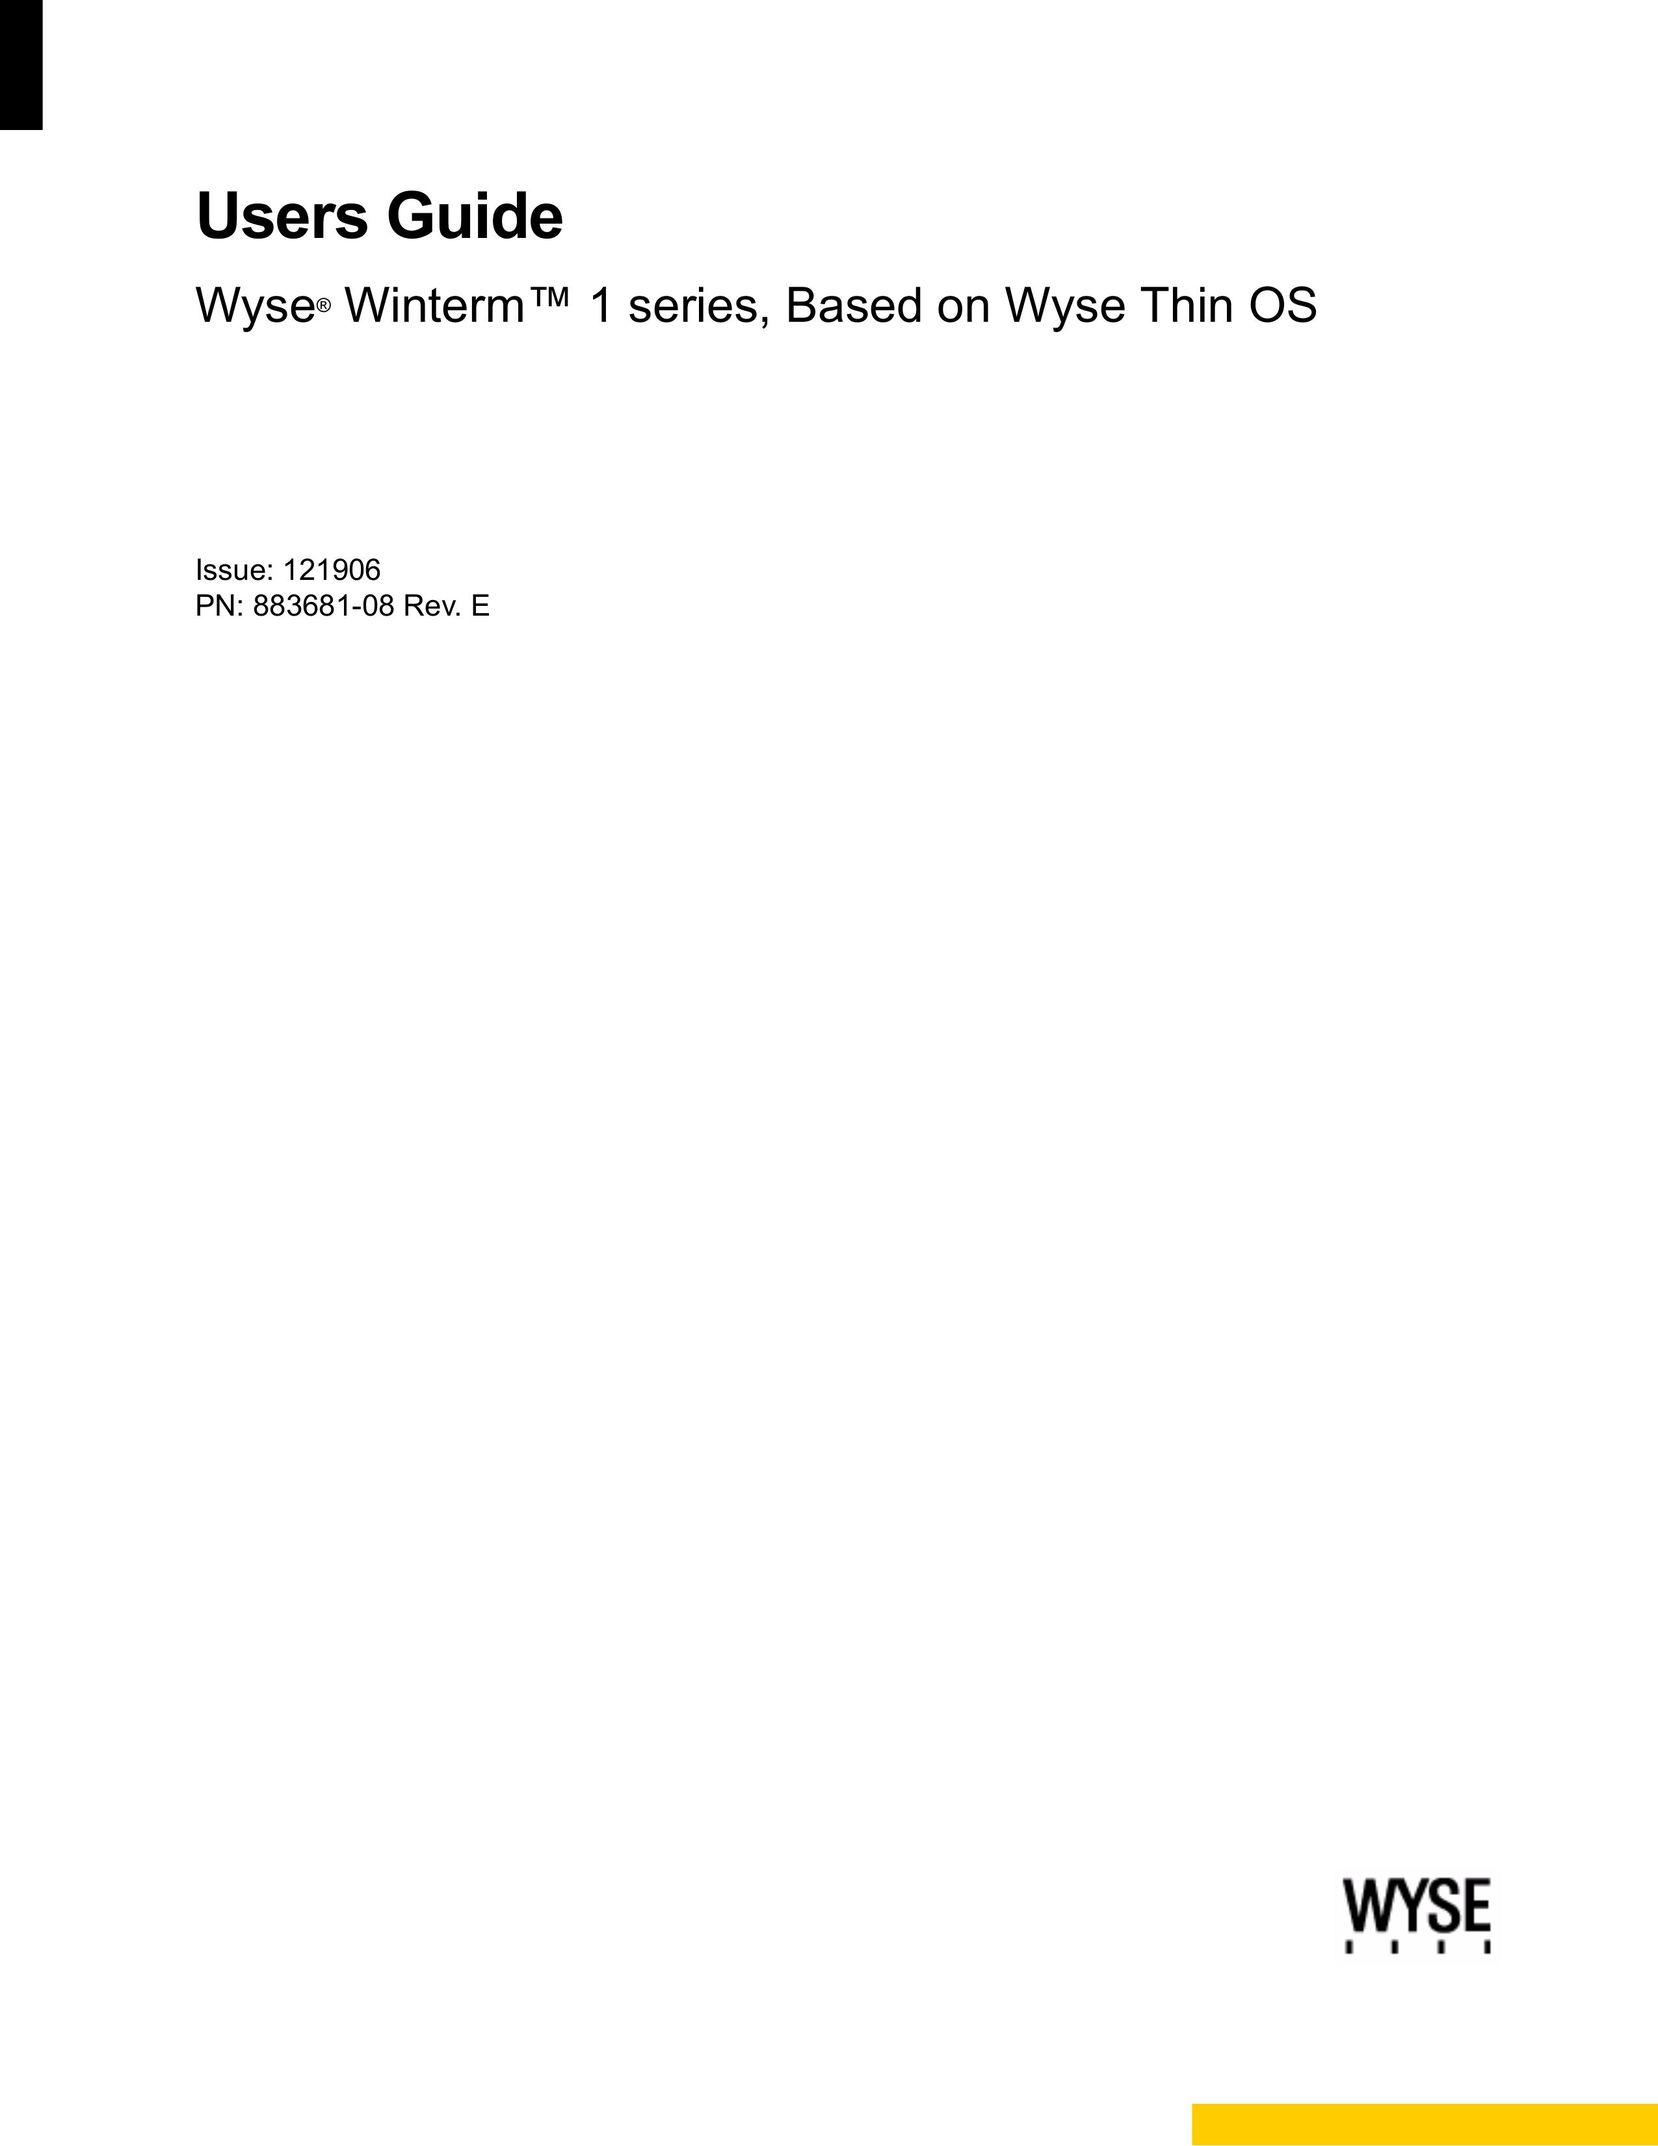 Wyse Technology 883681-08 Rev. E Personal Computer User Manual